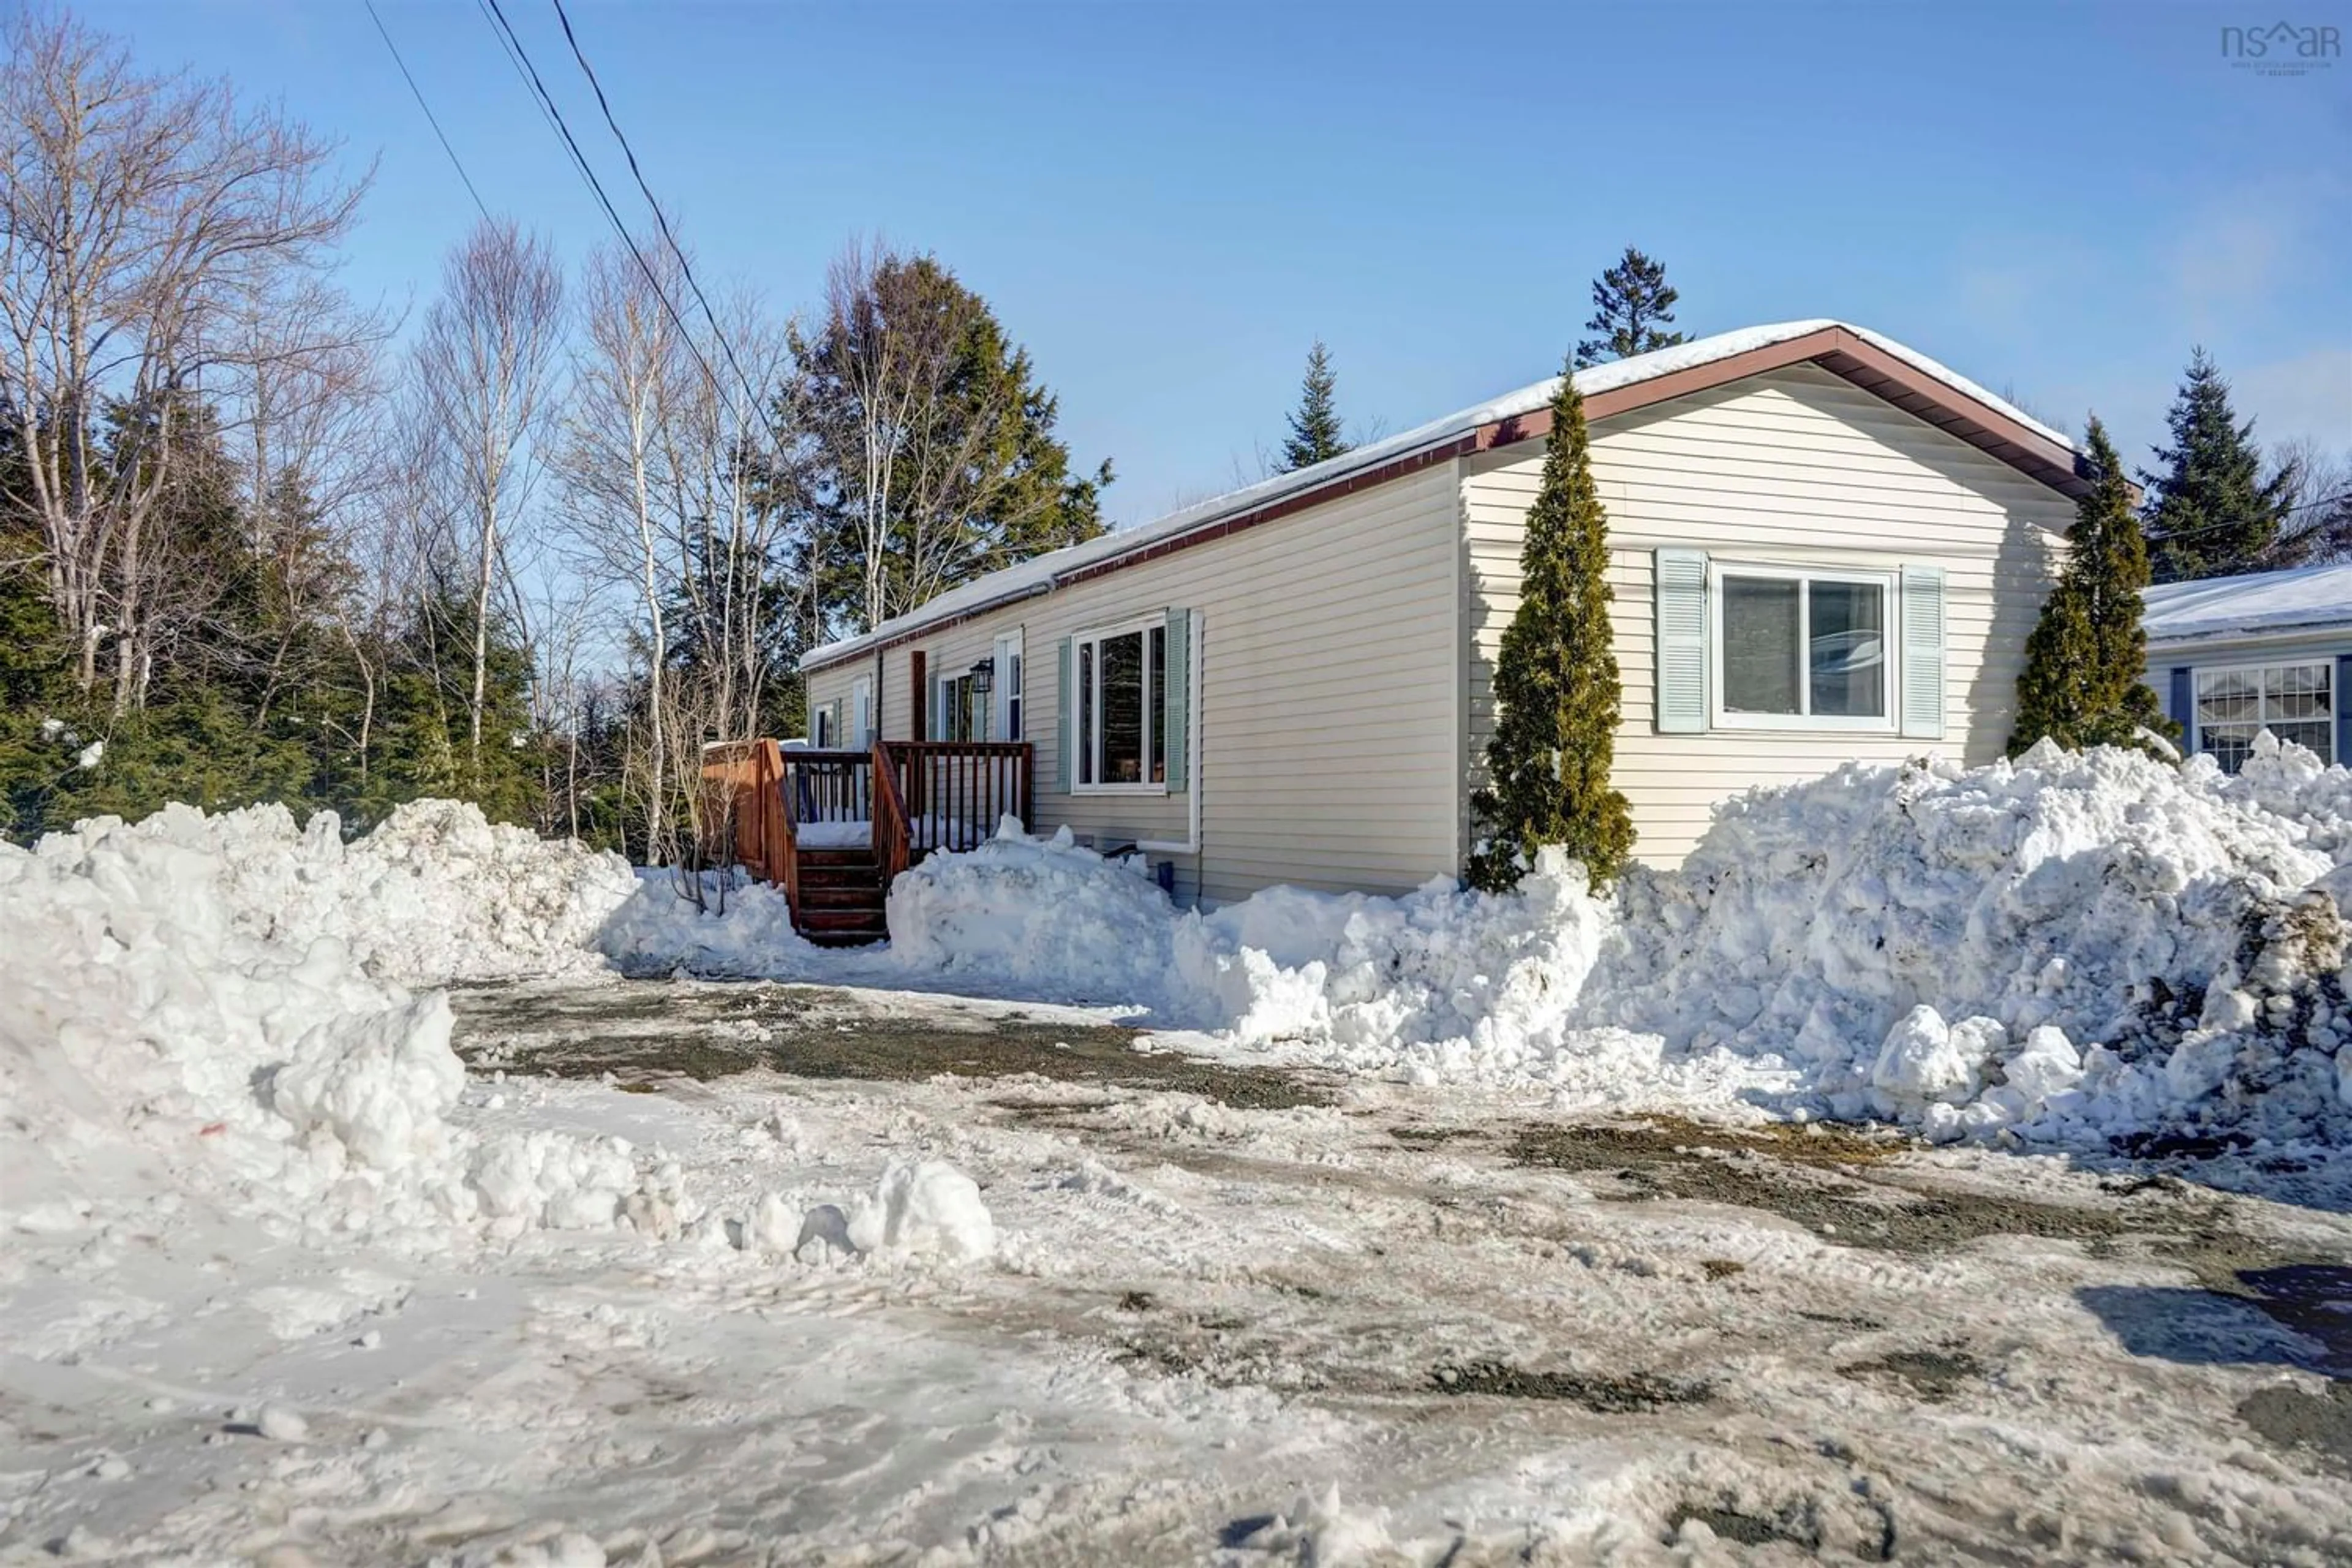 Home with unknown exterior material for 44 Mountain View Dr, Lake Echo Nova Scotia B3E 1B6